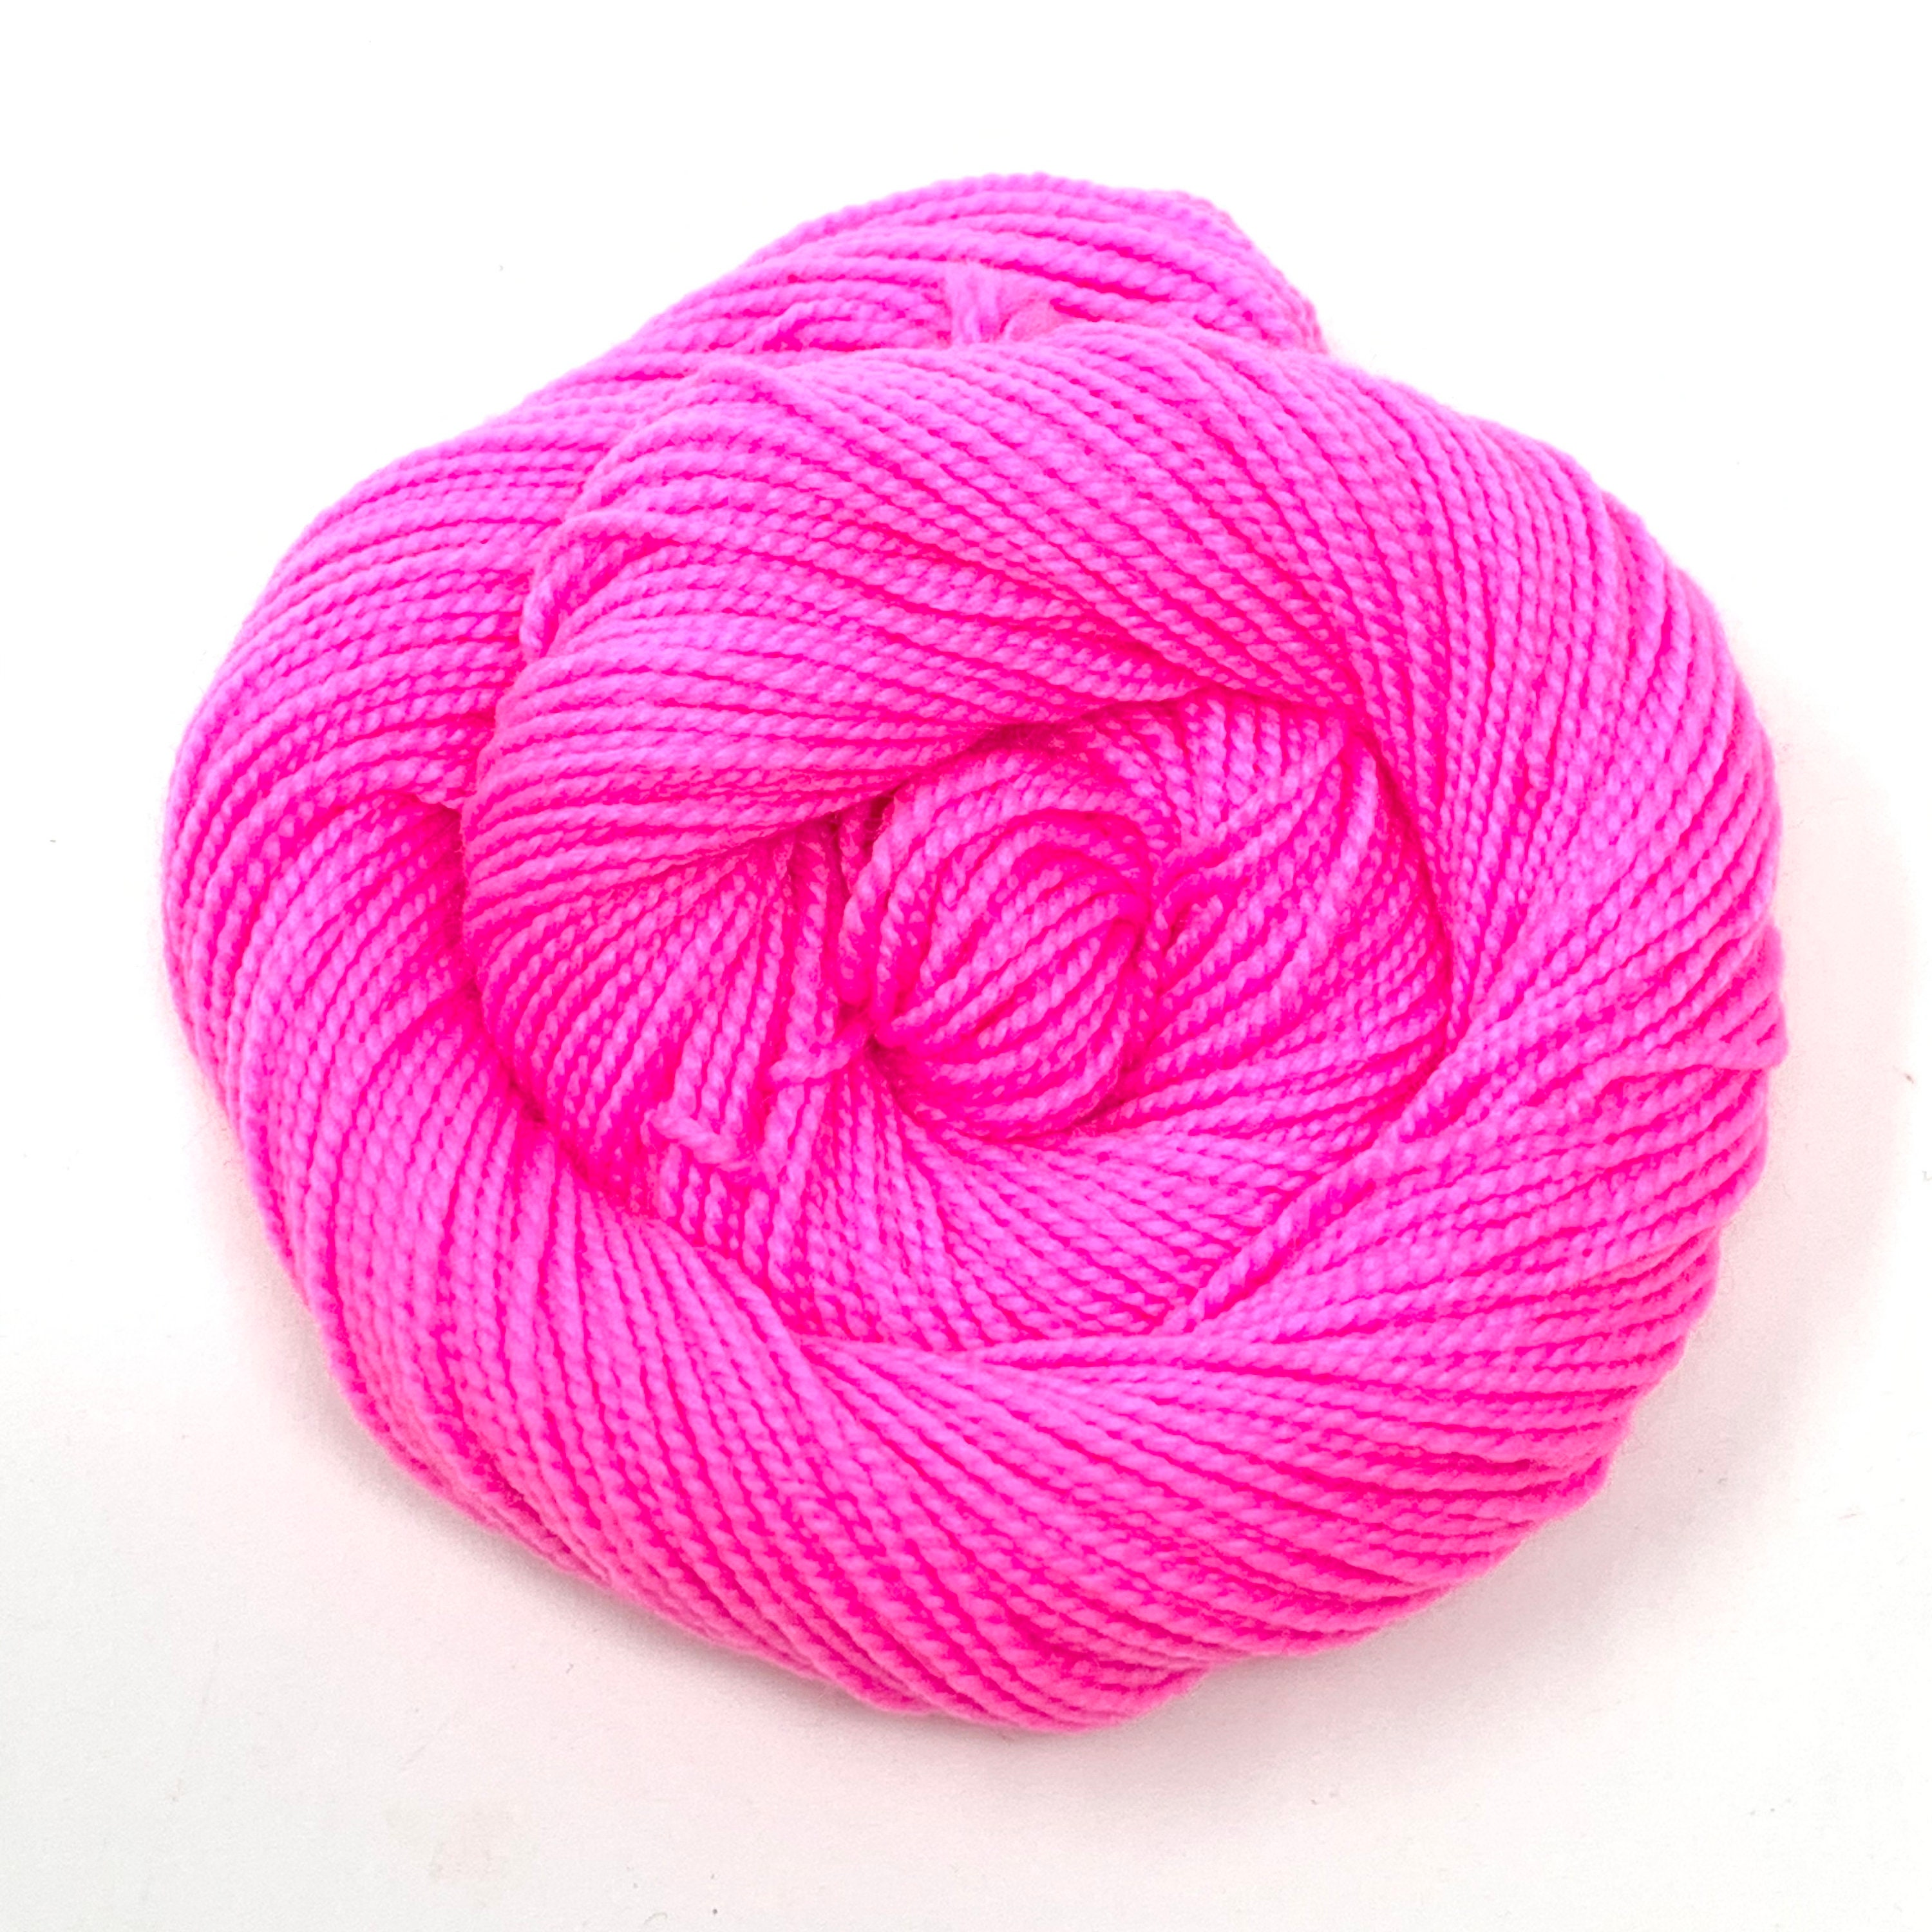 Pink Droid- Hand dyed palindrome variegated yarn - Merino Fingering to